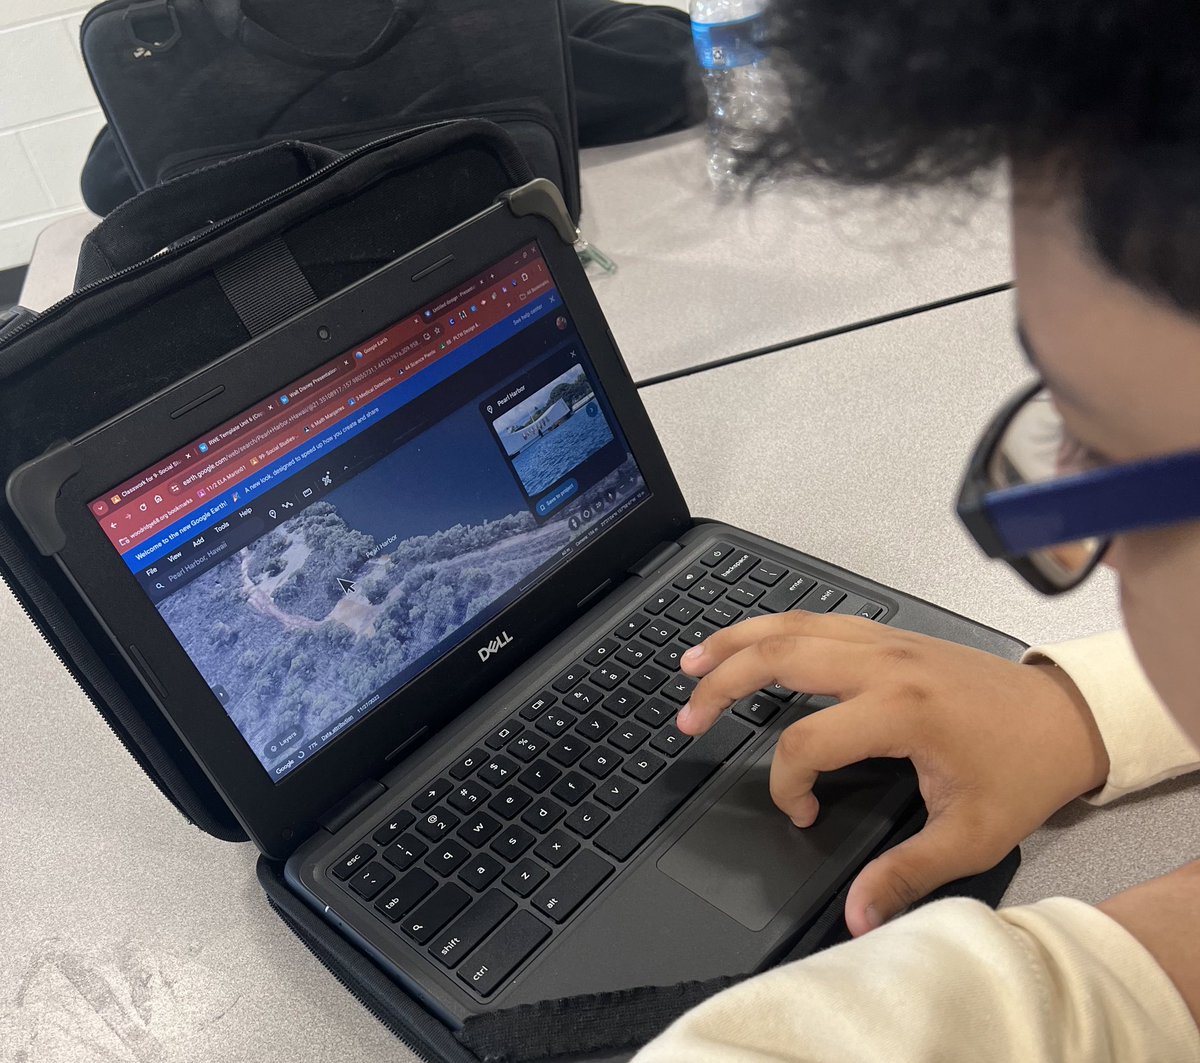 Rockstar 7th graders making final touches to their inquiry presentations in @wakelet and making the most of some epic app-smashing embedding @CanvaEdu presentations for live trivia and links to #GoogleEarth projects to give their presentations that extra, immersive flair 🙌💙